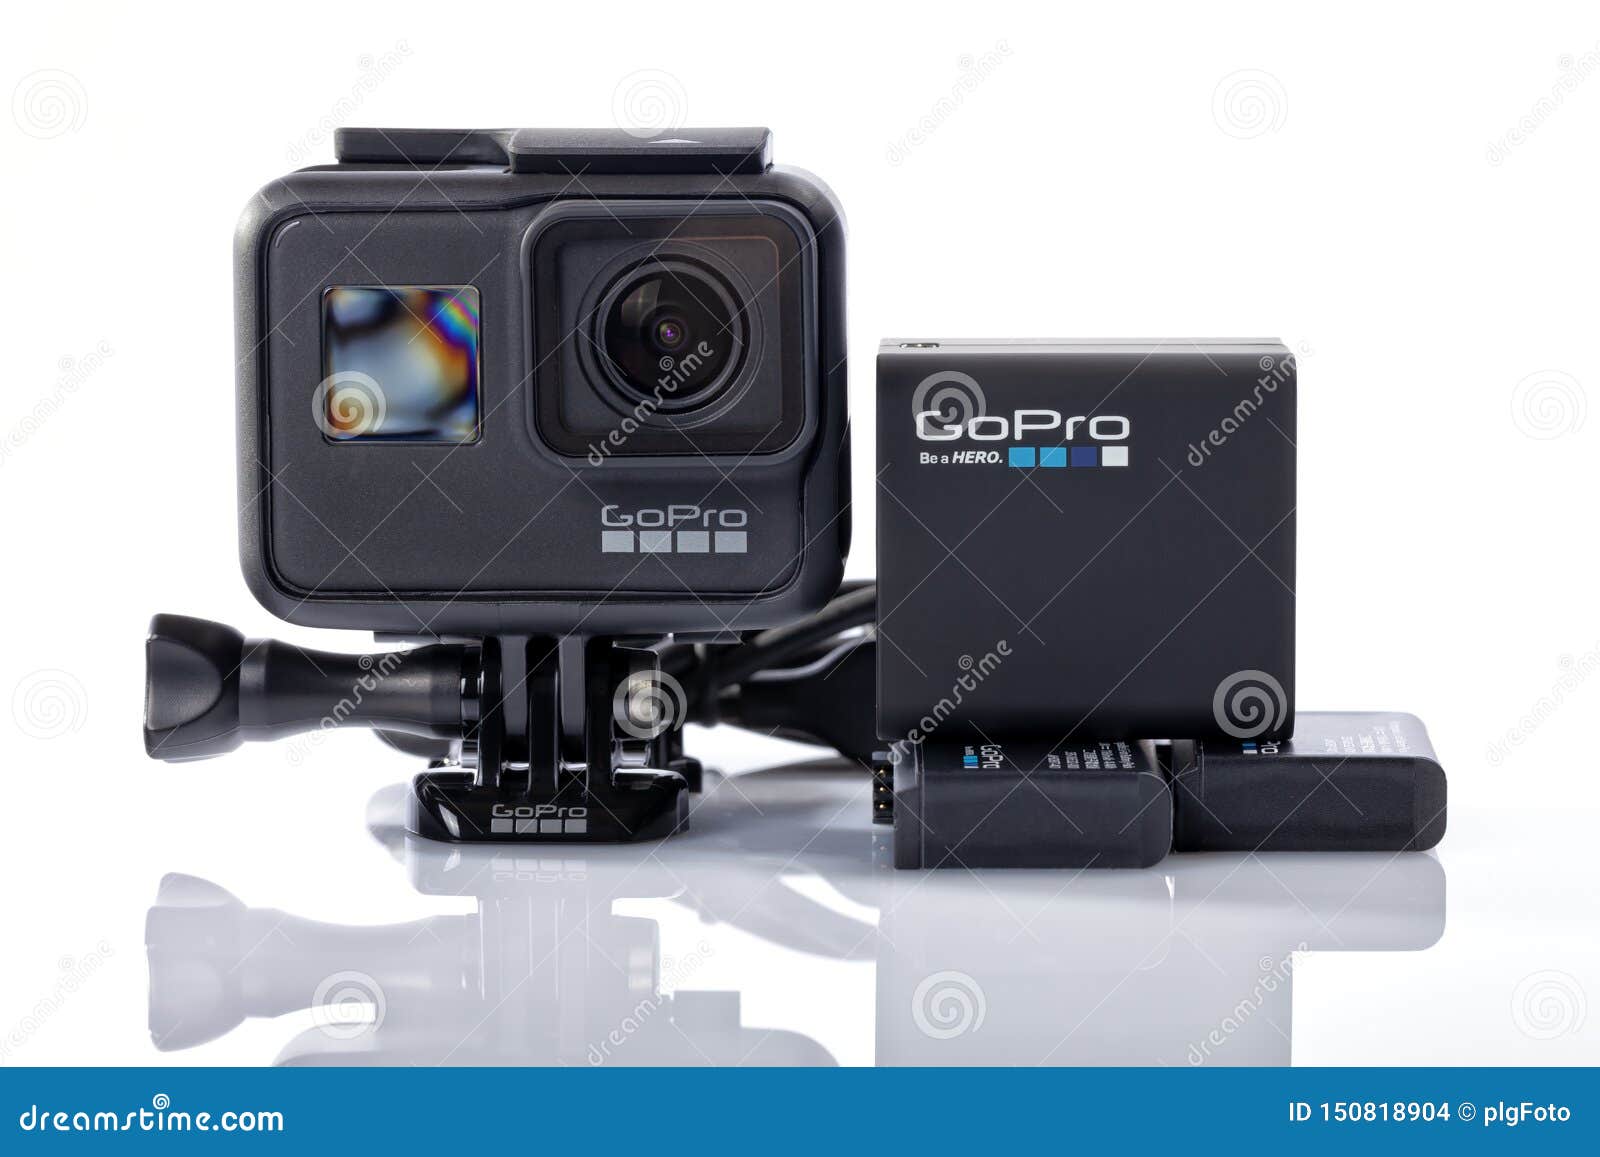 Gopro Hero 7 Black With Charger And Batteries Isolated On White Editorial Stock Image Image Of Hero Spain